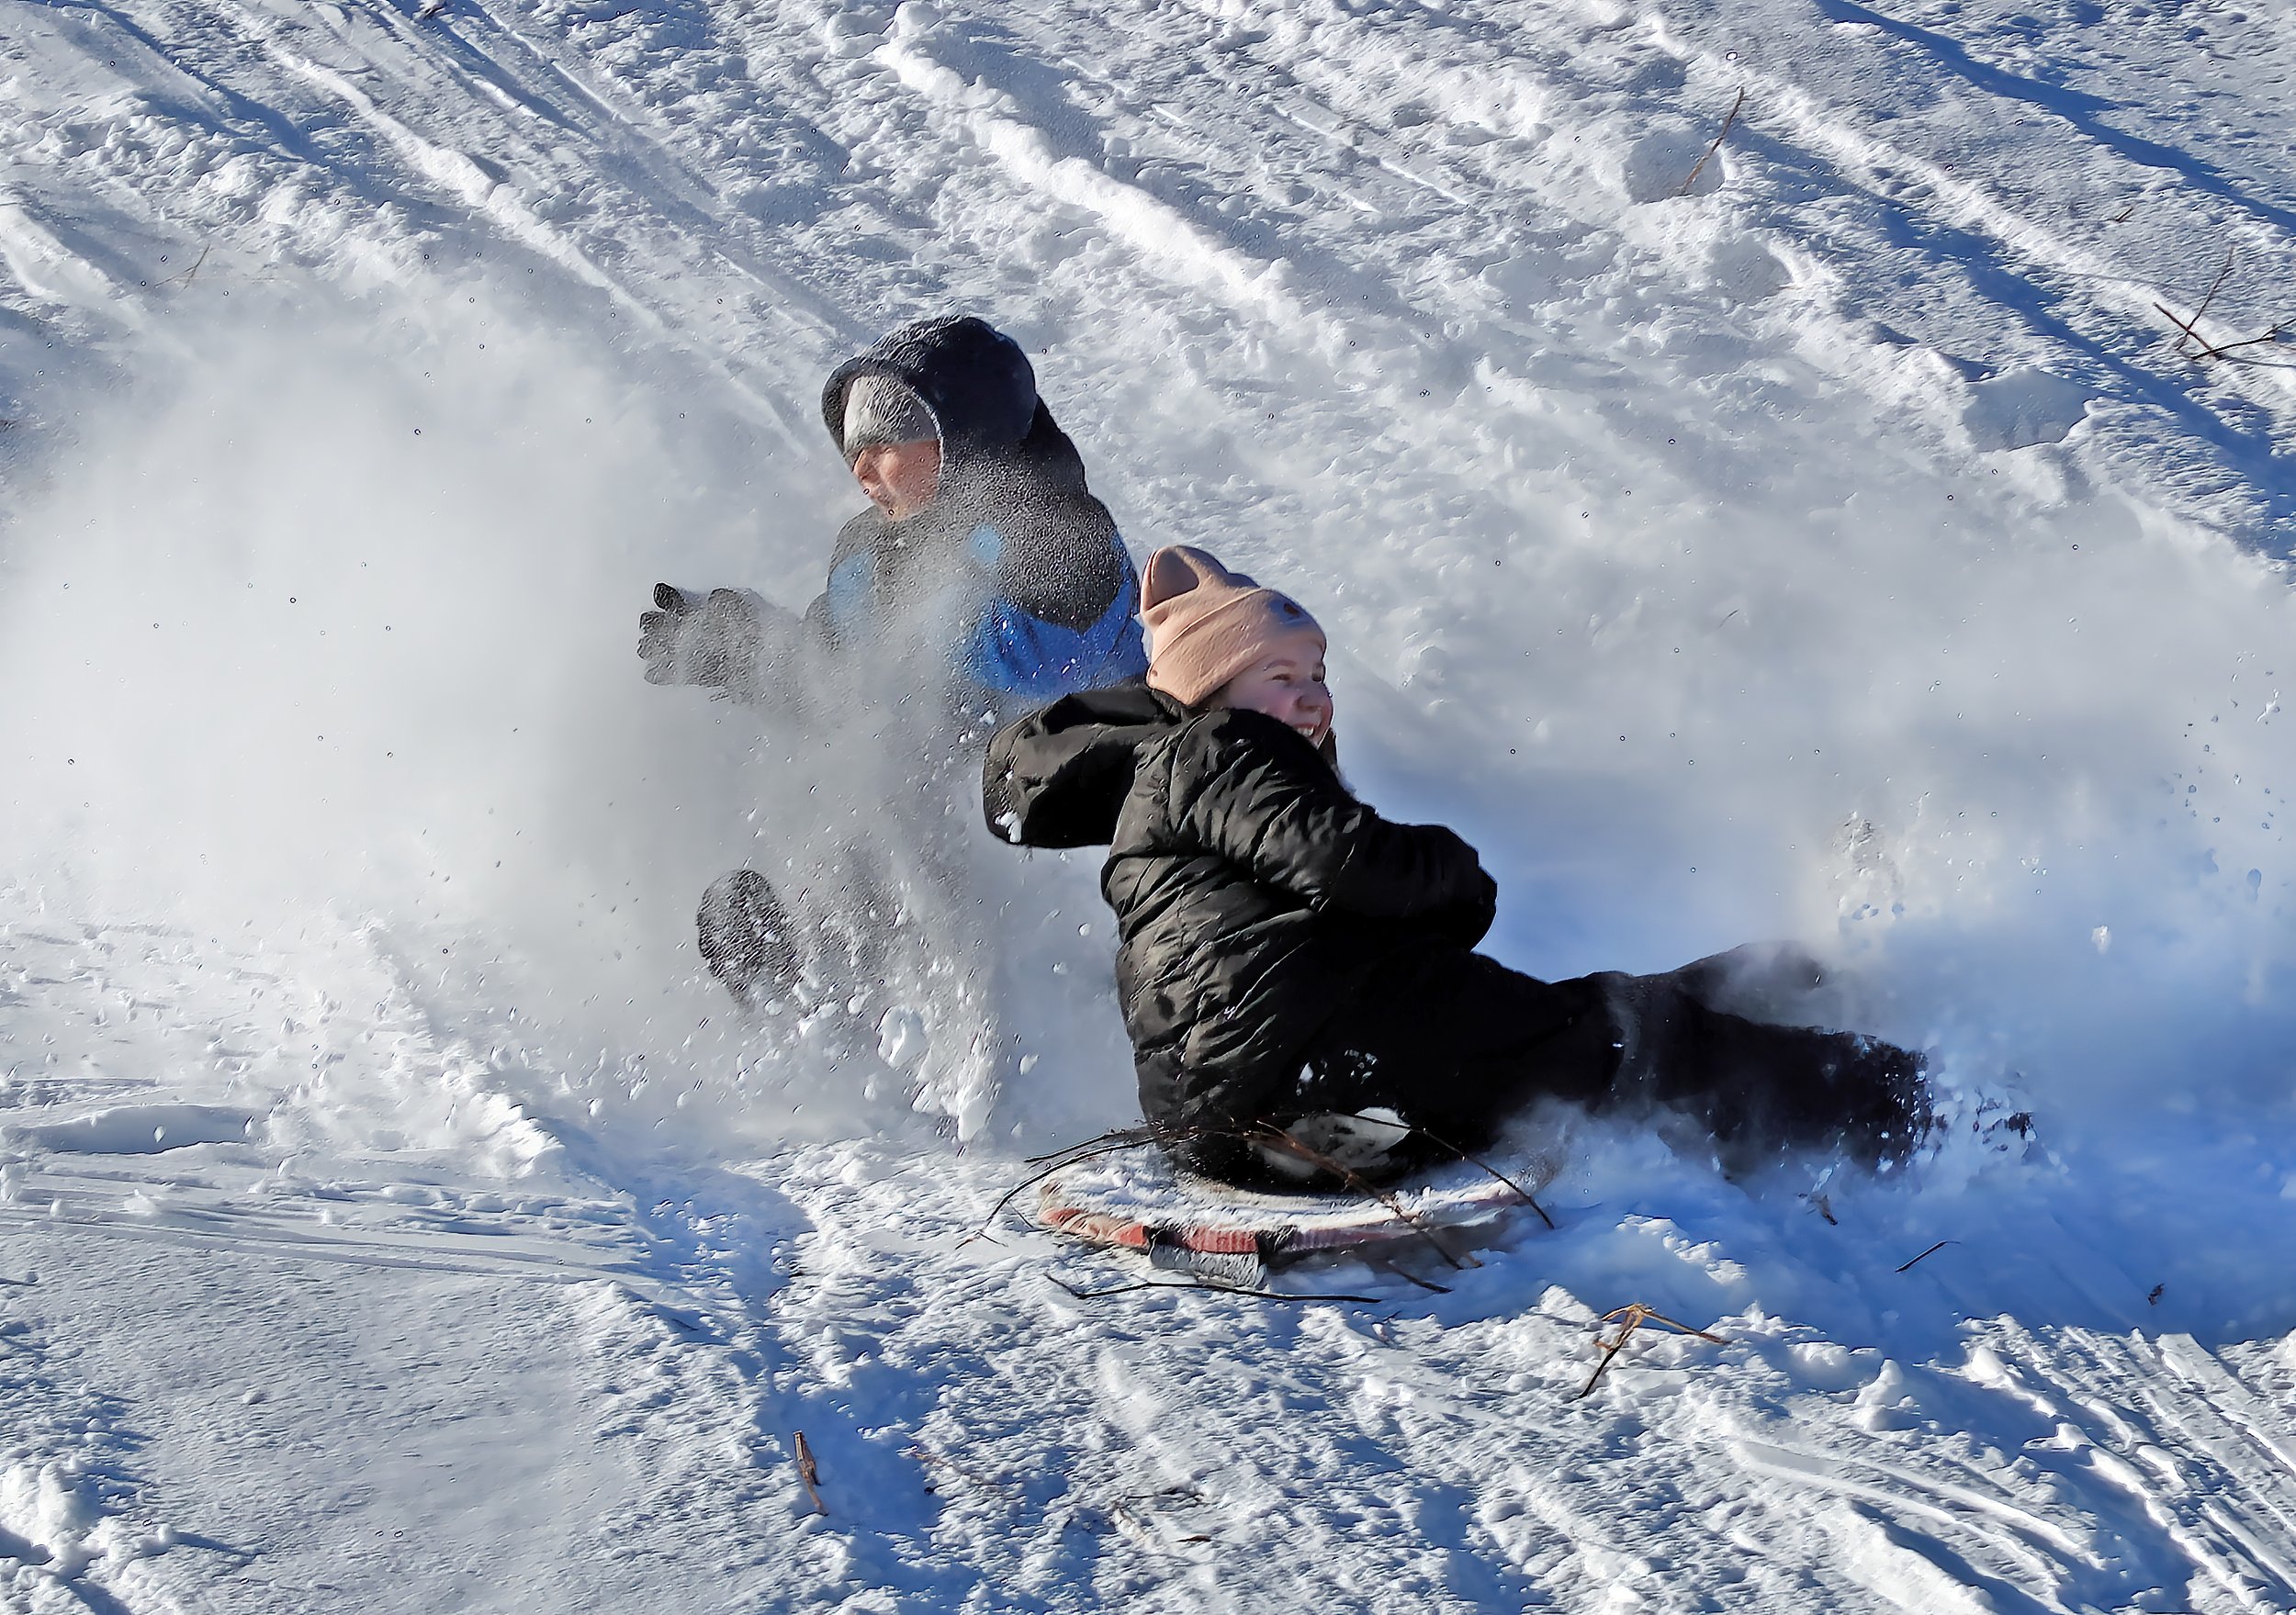  Gracie and Blake Barber get a snowy downhill thrill. Photo by Gordon Miller 